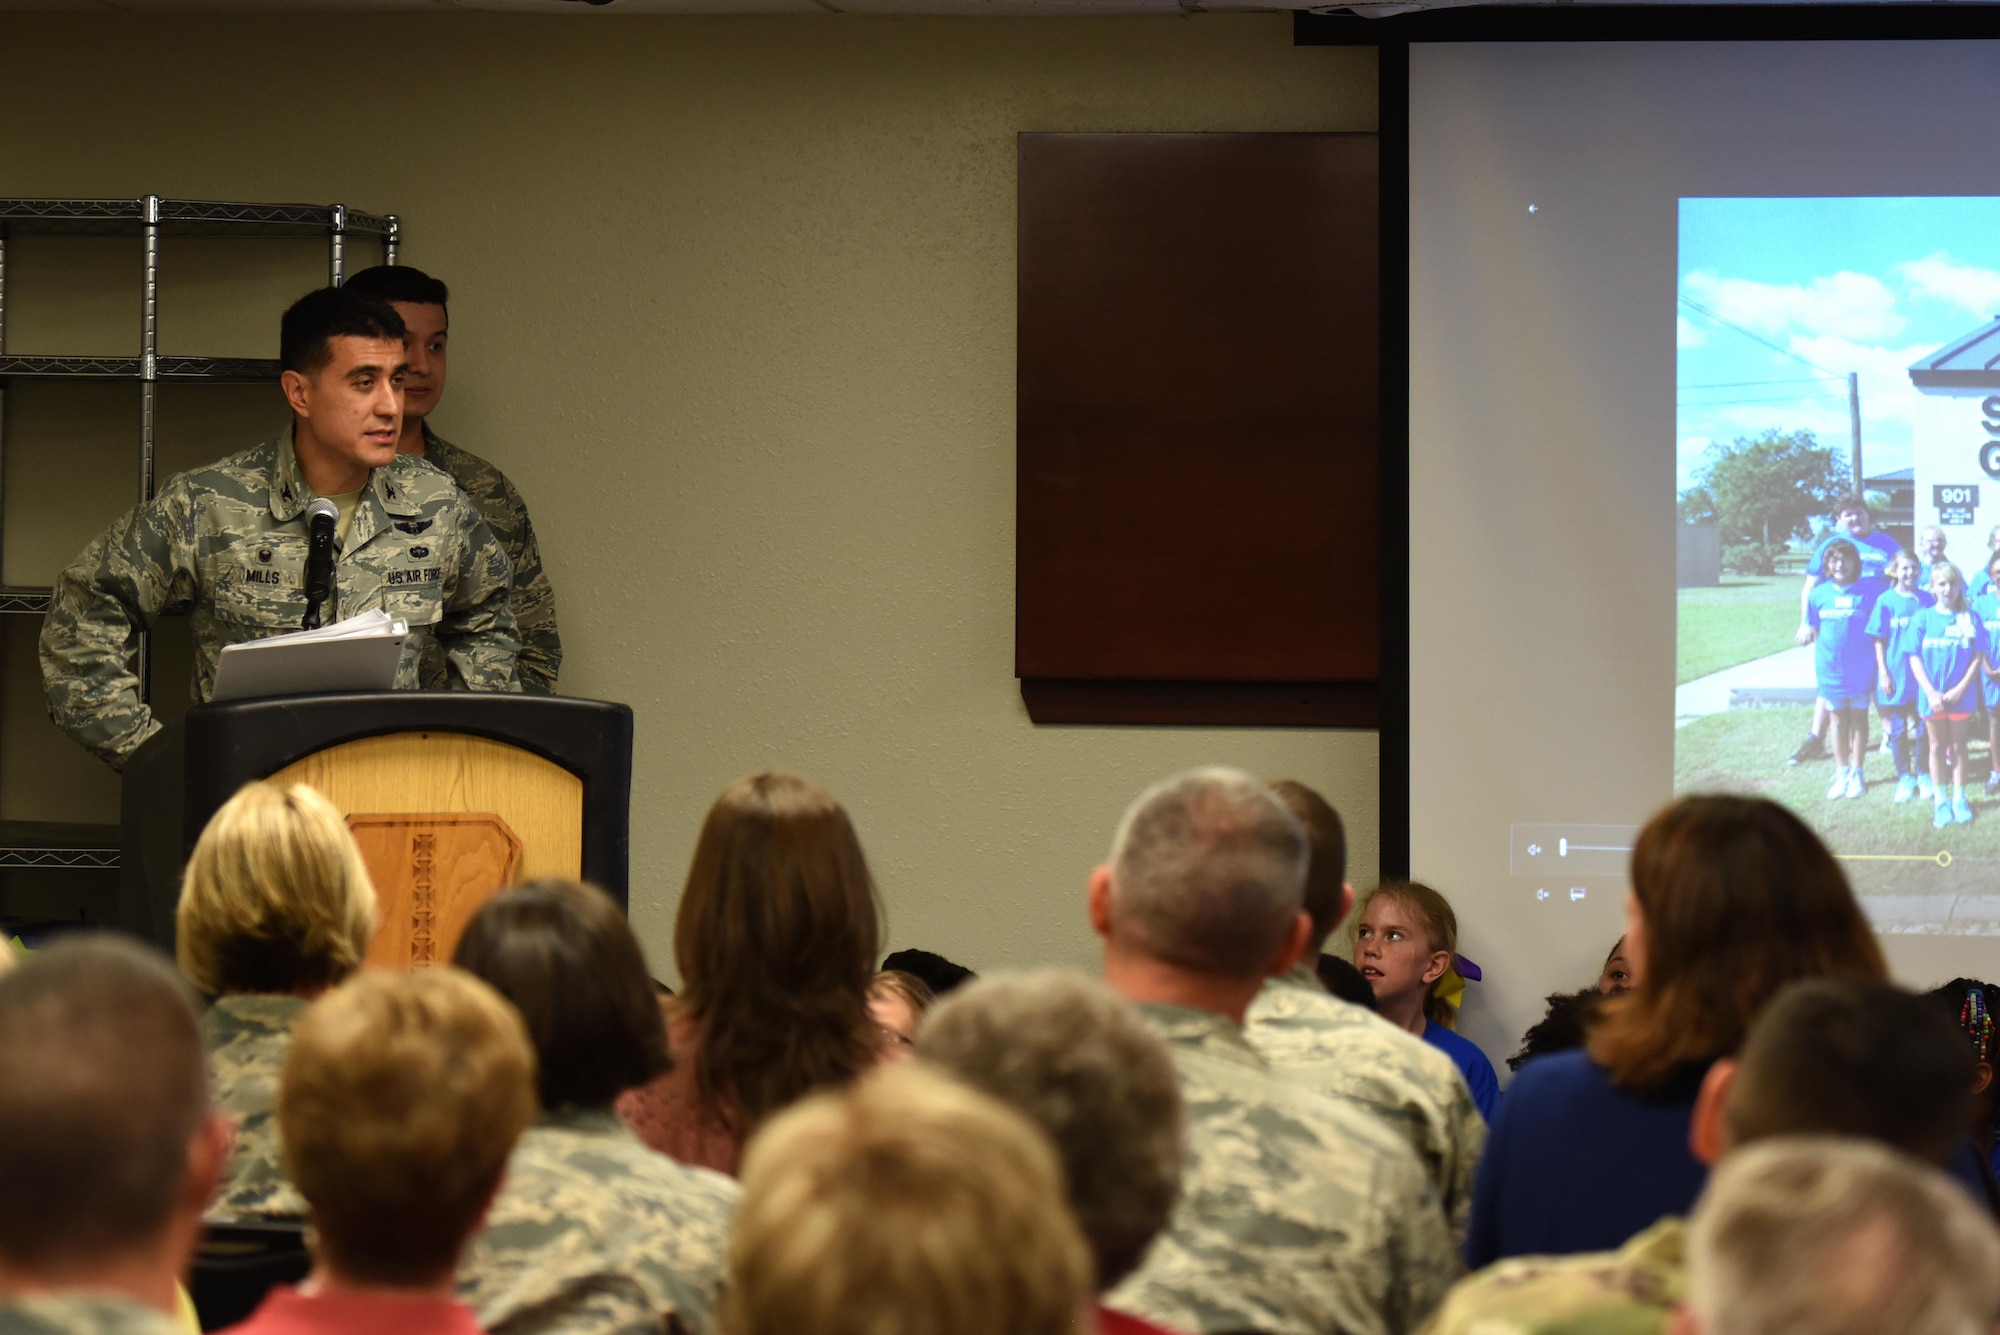 U.S. Air Force Col. Ricky Mills, 17th Training Wing commander, provides opening remarks for the ribbon cutting ceremony at the STARBASE Goodfellow building on Goodfellow Air Force Base, Texas, Oct. 4, 2017. Goodfellow, partnered with the San Angelo community, requested the Department of Defense to allow the program on base. (U.S. Air Force photo by Airman Zachary Chapman/Released)